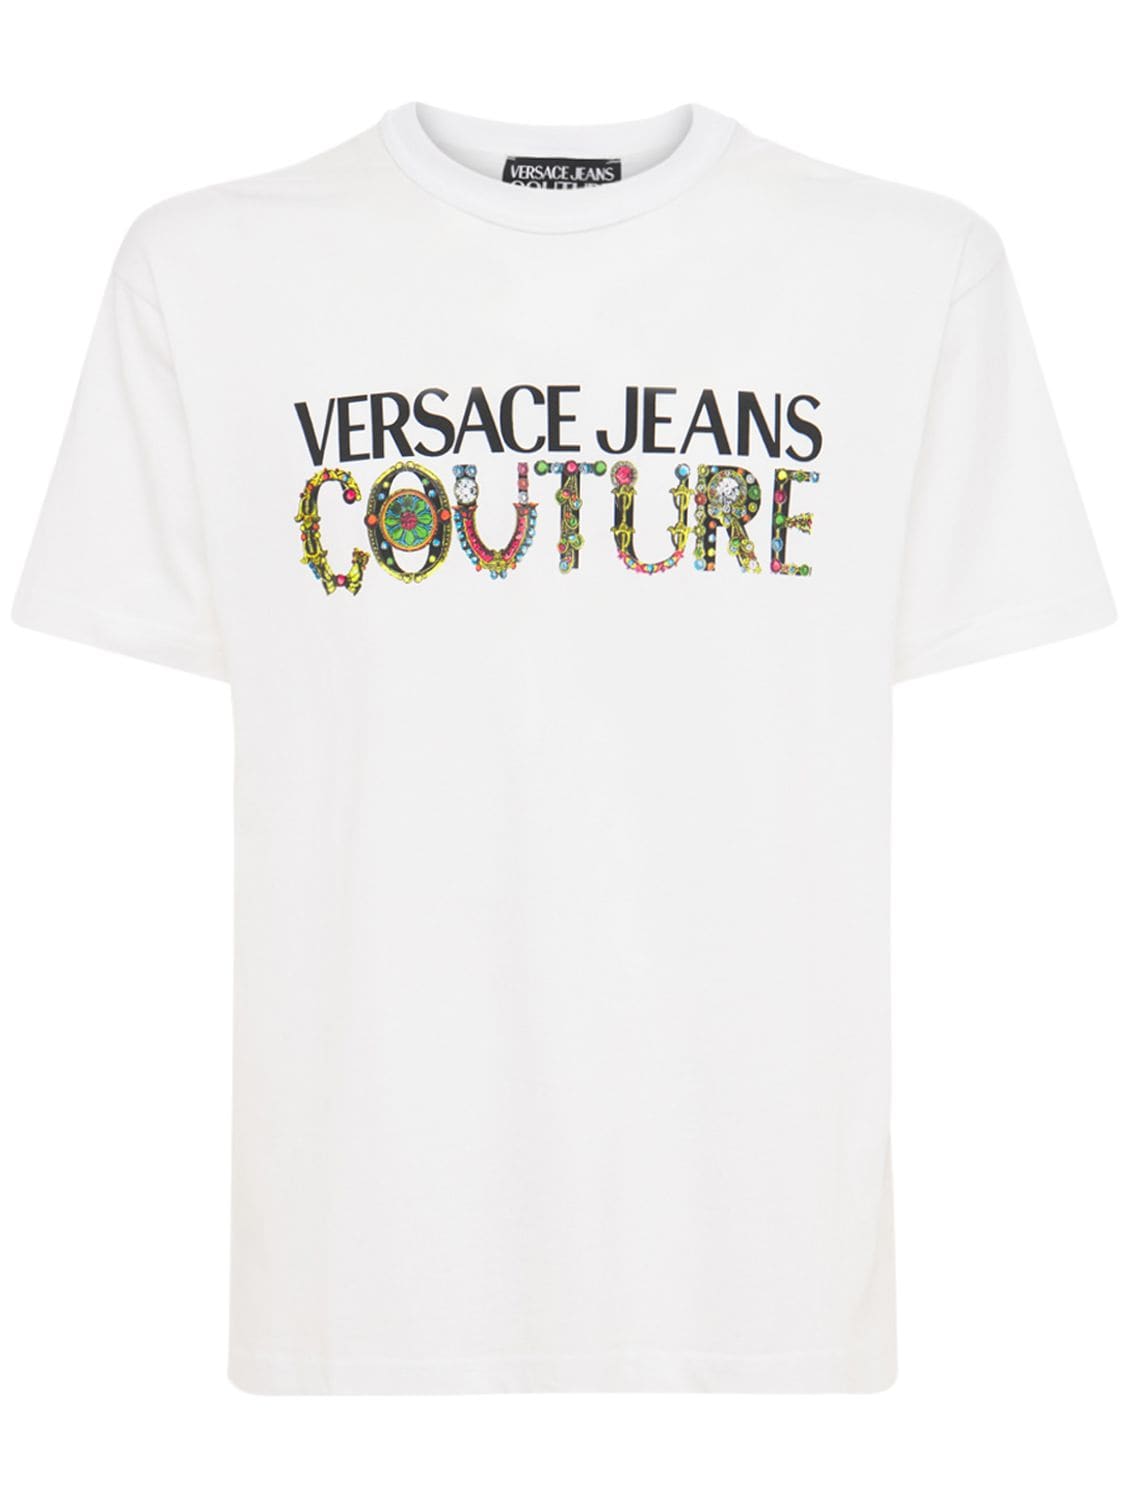 VERSACE JEANS COUTURE LOGO印花棉质平纹针织T恤,74IBQN026-MDAZ0